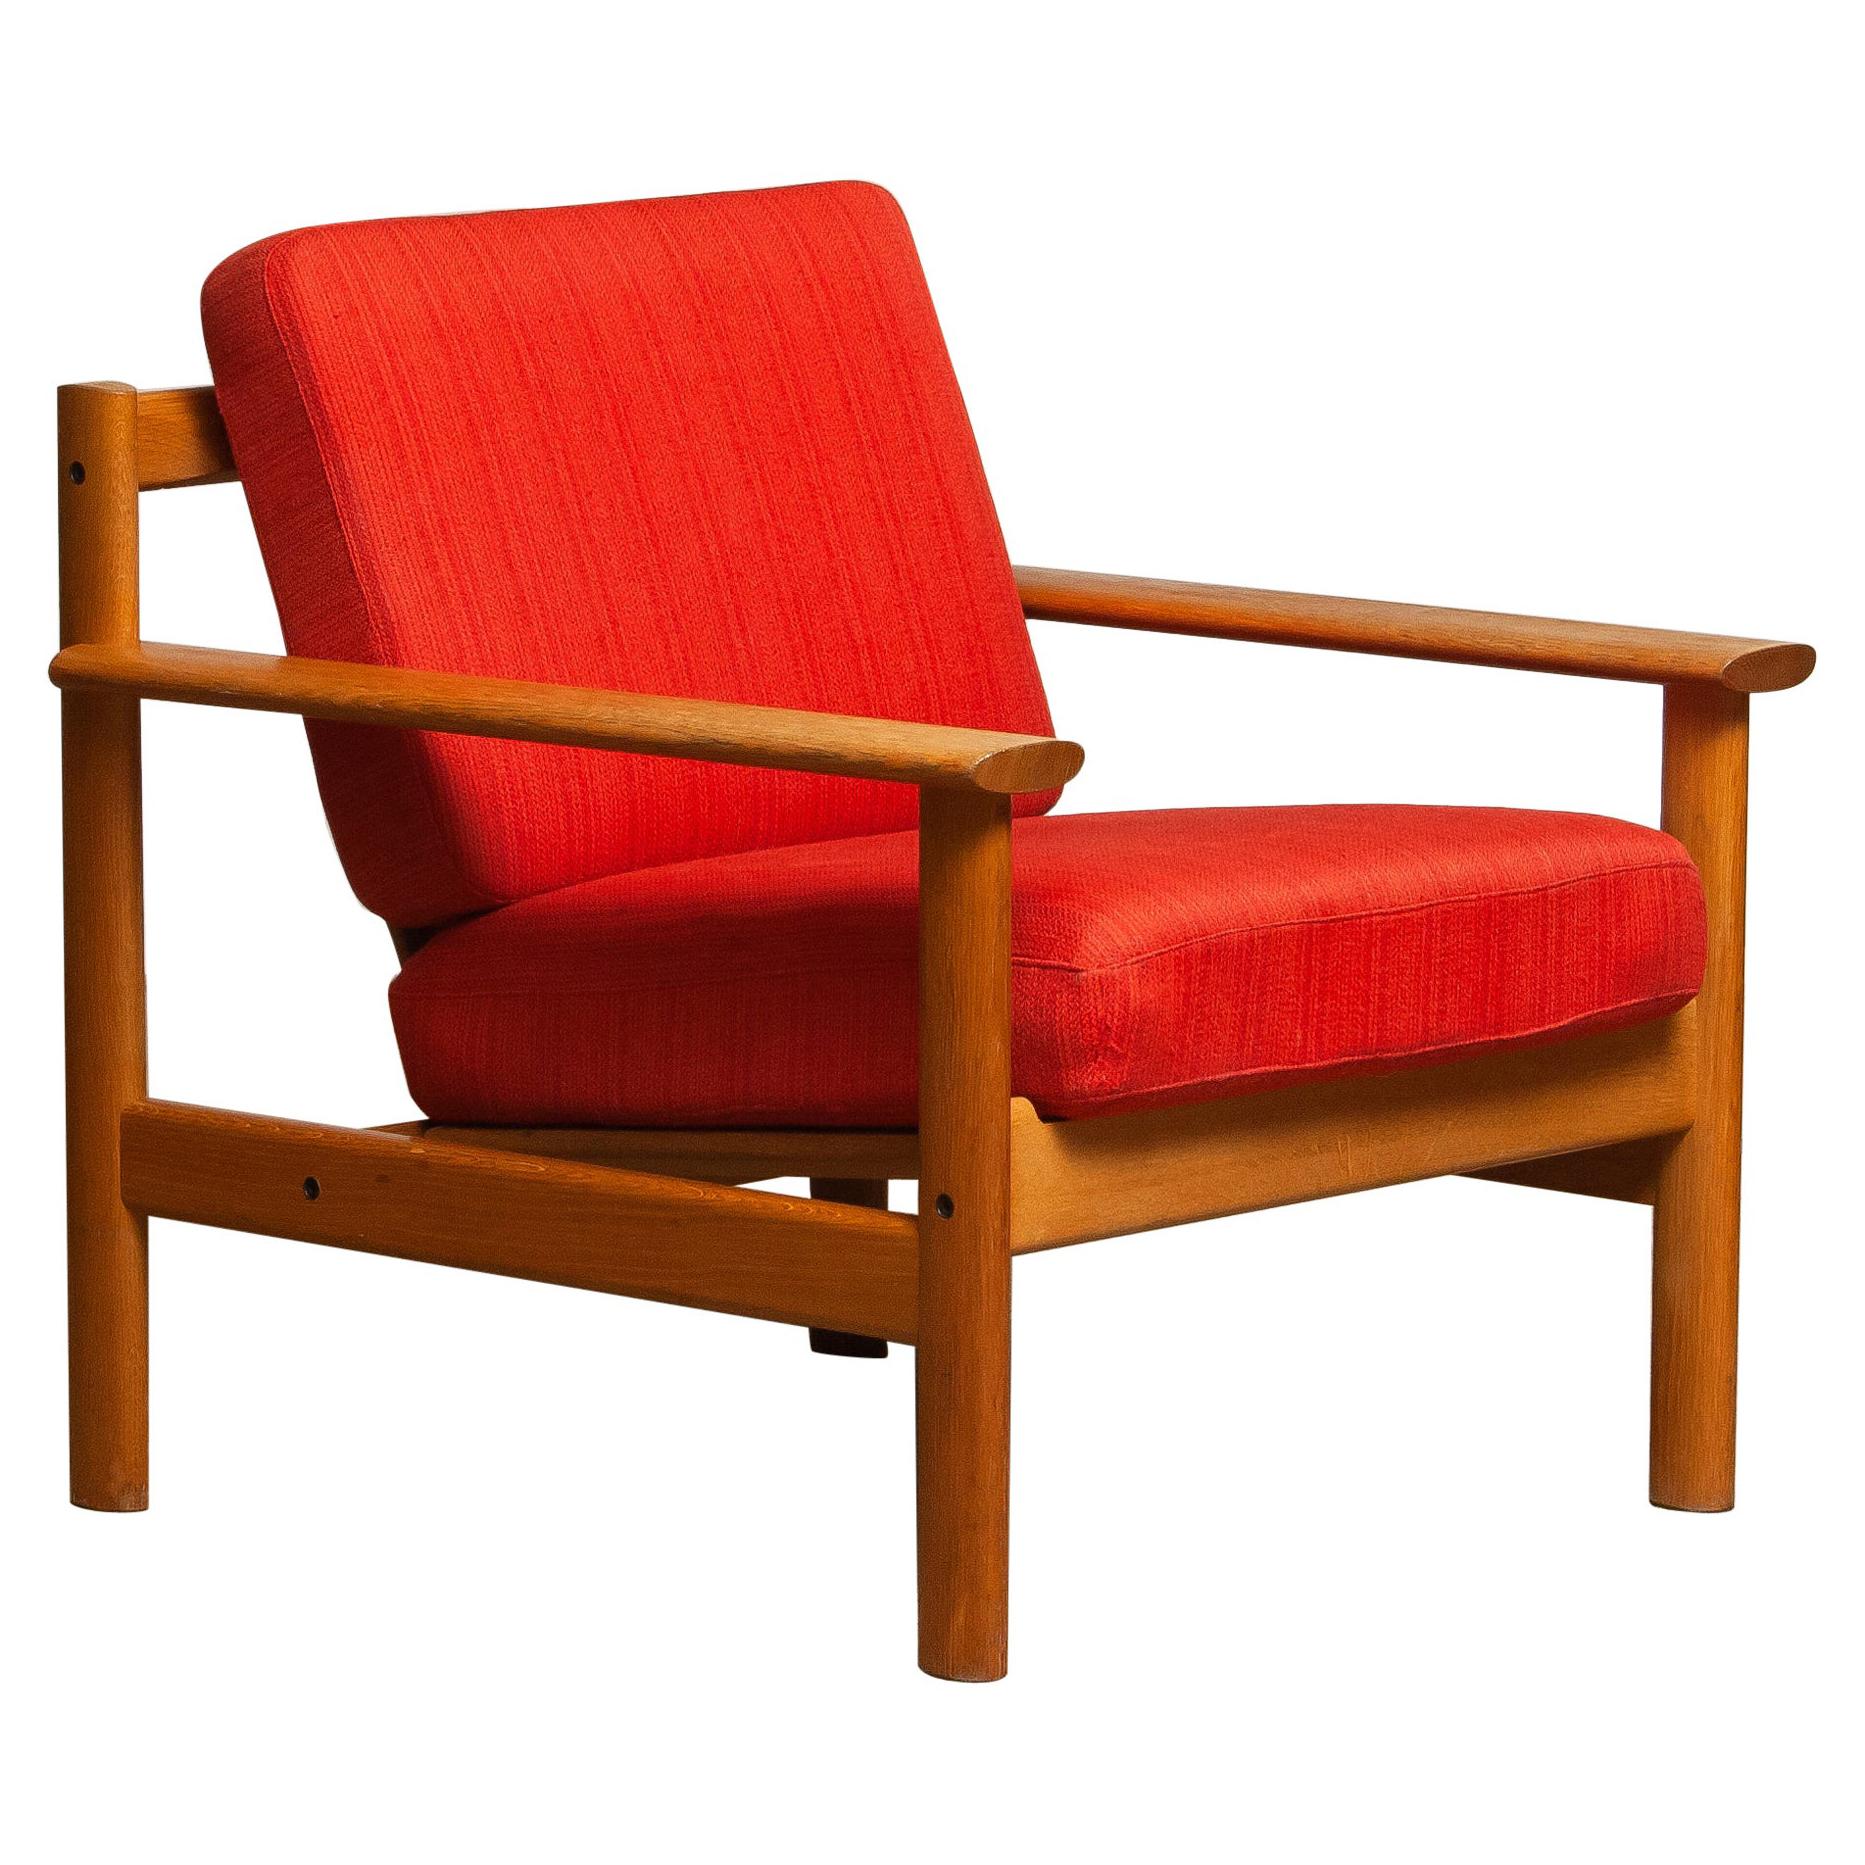 Firm Danish oak lounge easy chair in the manner of Poul Volther from the 1960s.
The cushions are a metal base with spring and still upholstered with the original fabric.
Overall condition is good.
Note that we have two similar chairs. See the